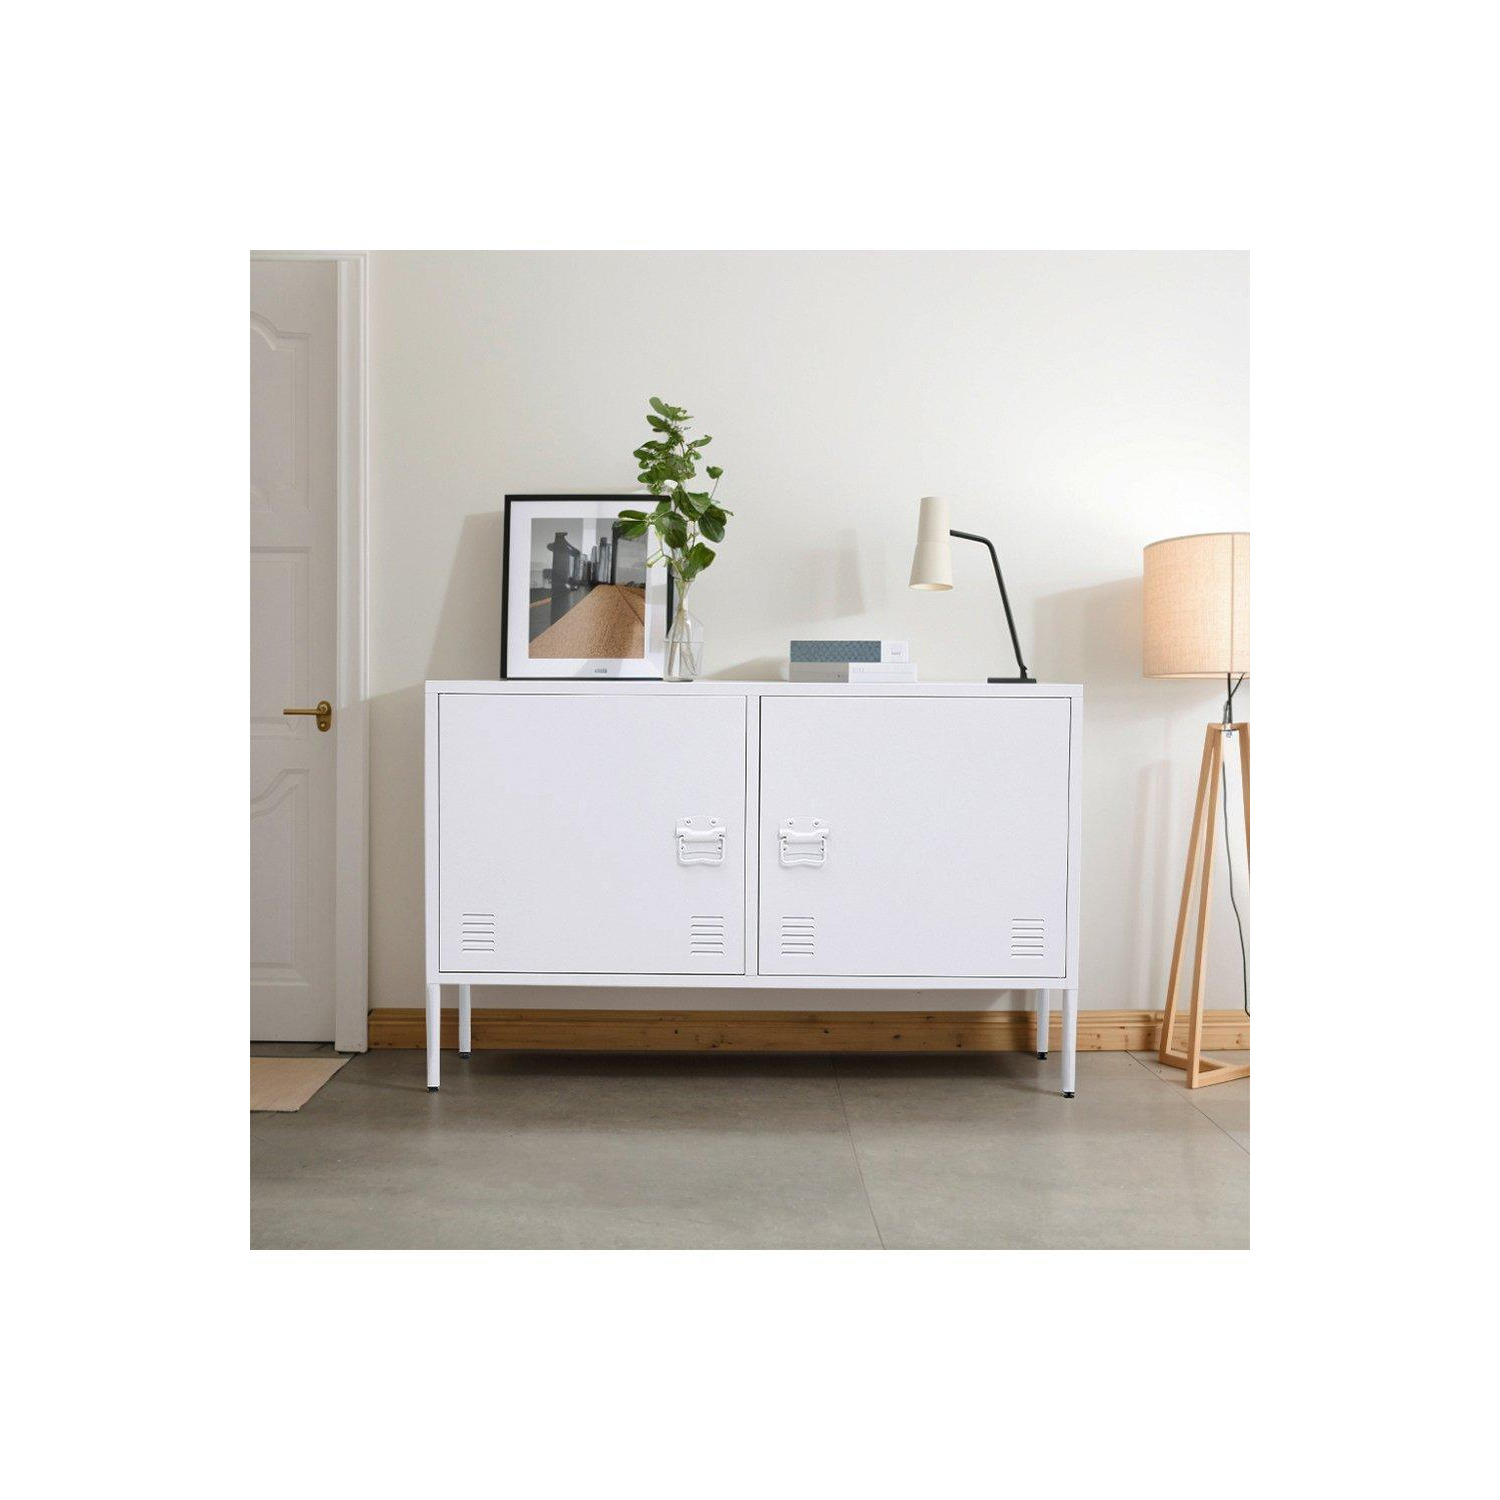 White Metal Lateral File Cabinet with 2 Doors Industrial Style TV Stand Storage Cabinet - image 1